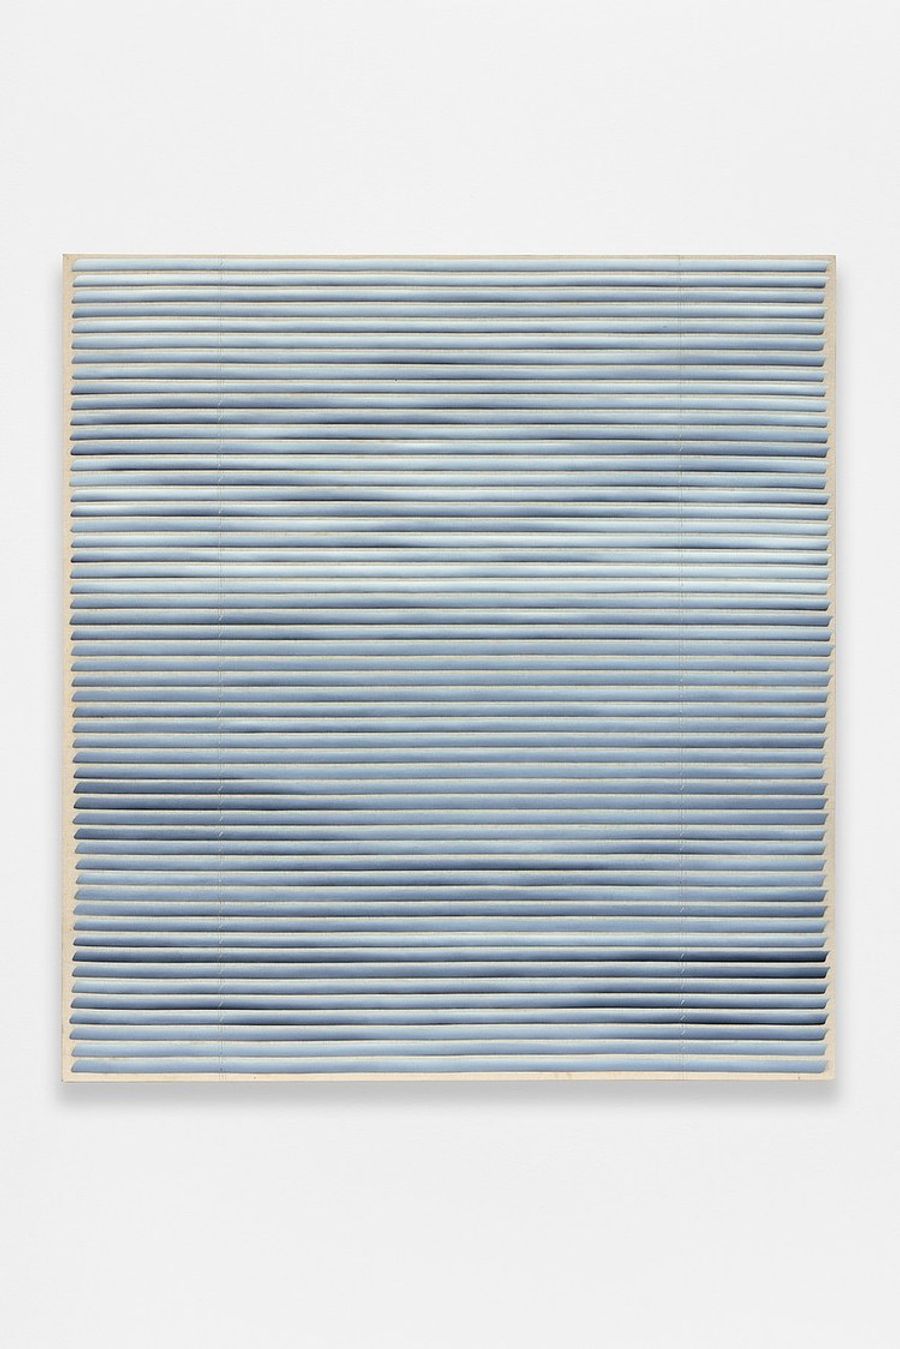 Untitled (Gray Blinds)